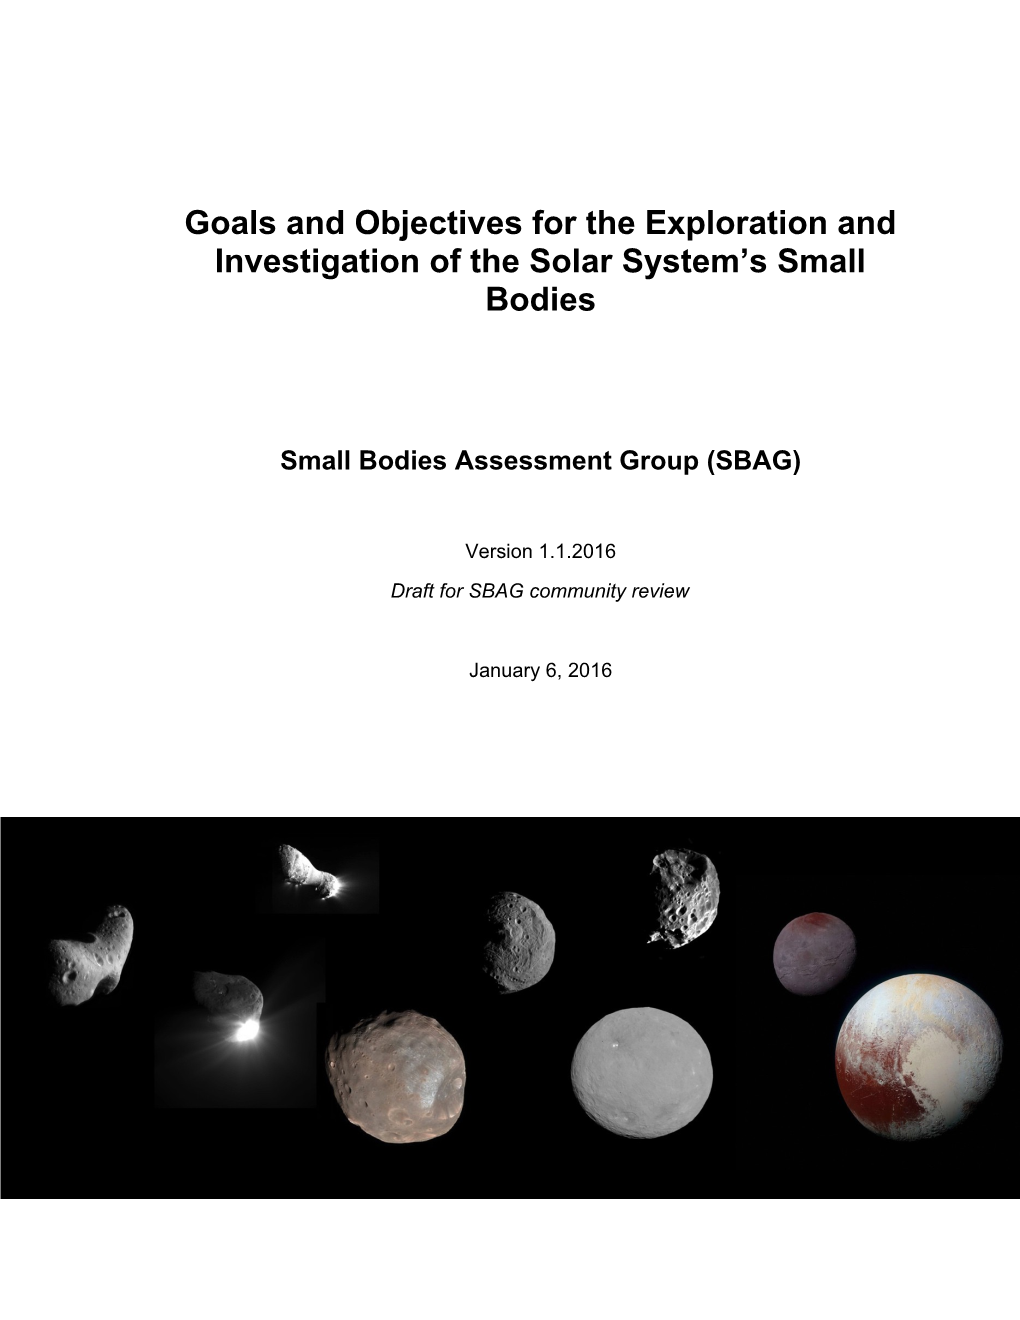 Goals and Objectives for the Exploration and Investigation of the Solar System S Small Bodies